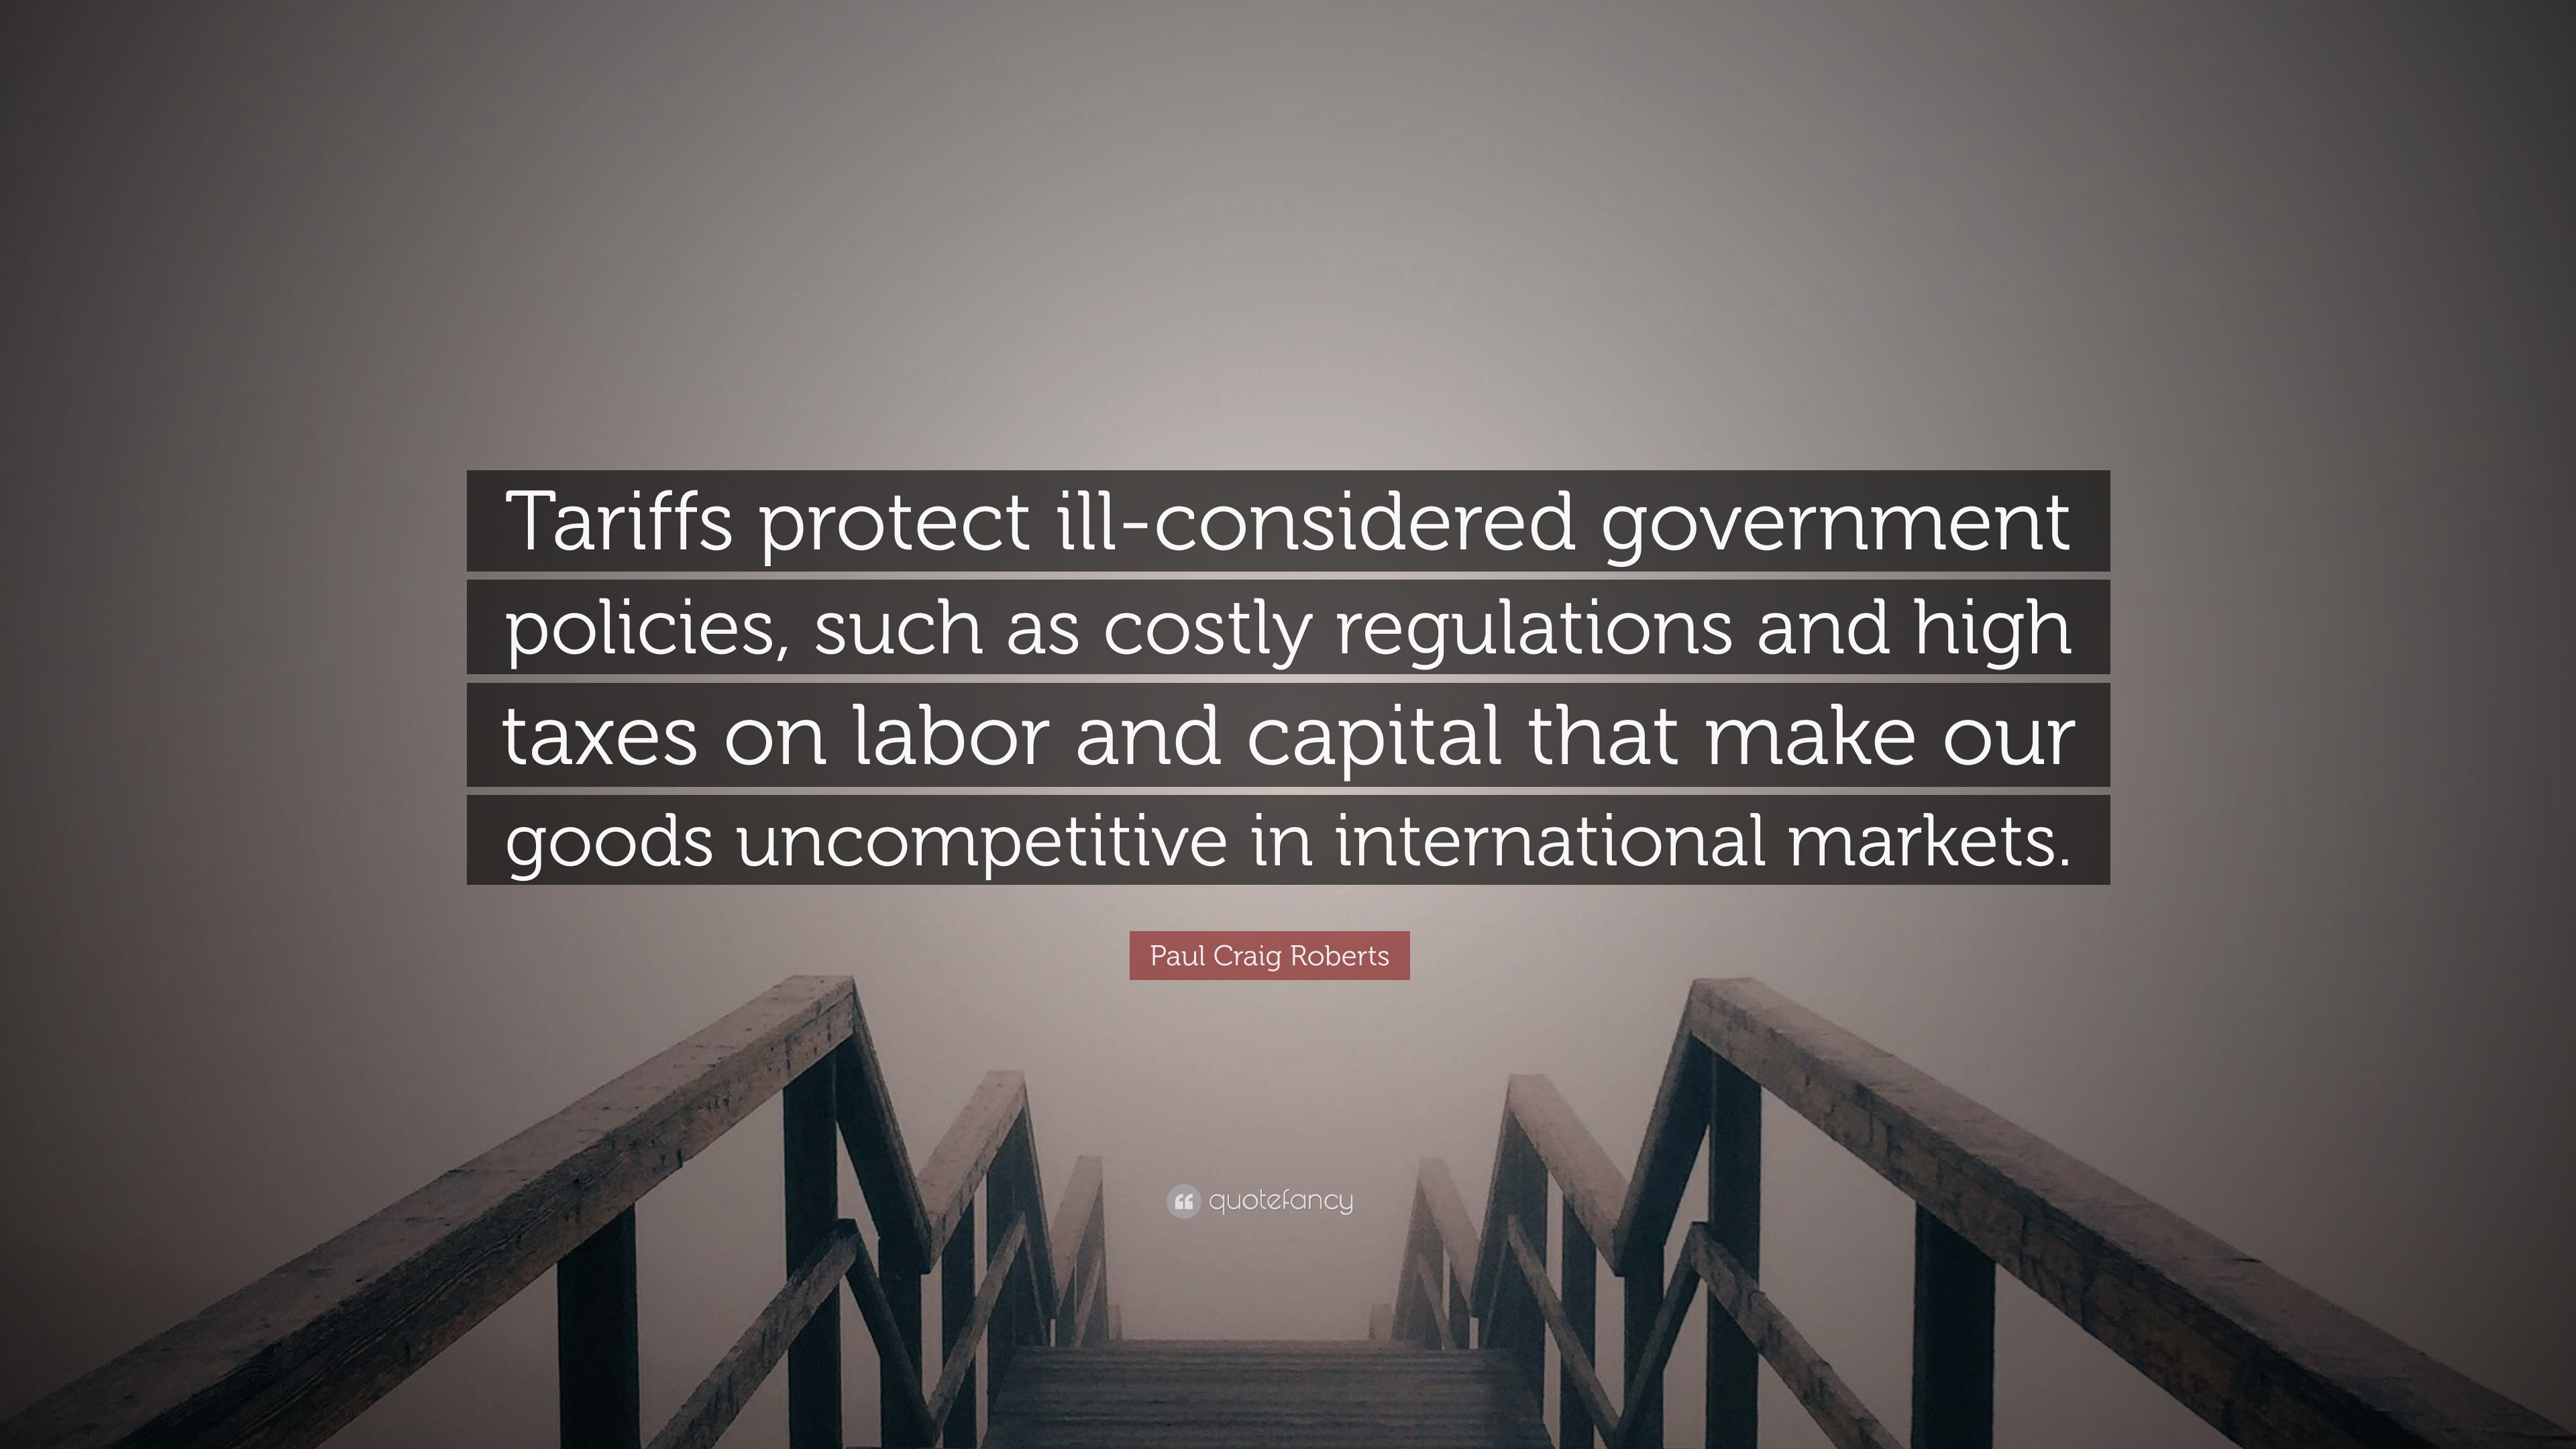 Paul Craig Roberts Quote: “Tariffs protect ill-considered government  policies, such as costly regulations and high taxes on labor and capital  that ...”